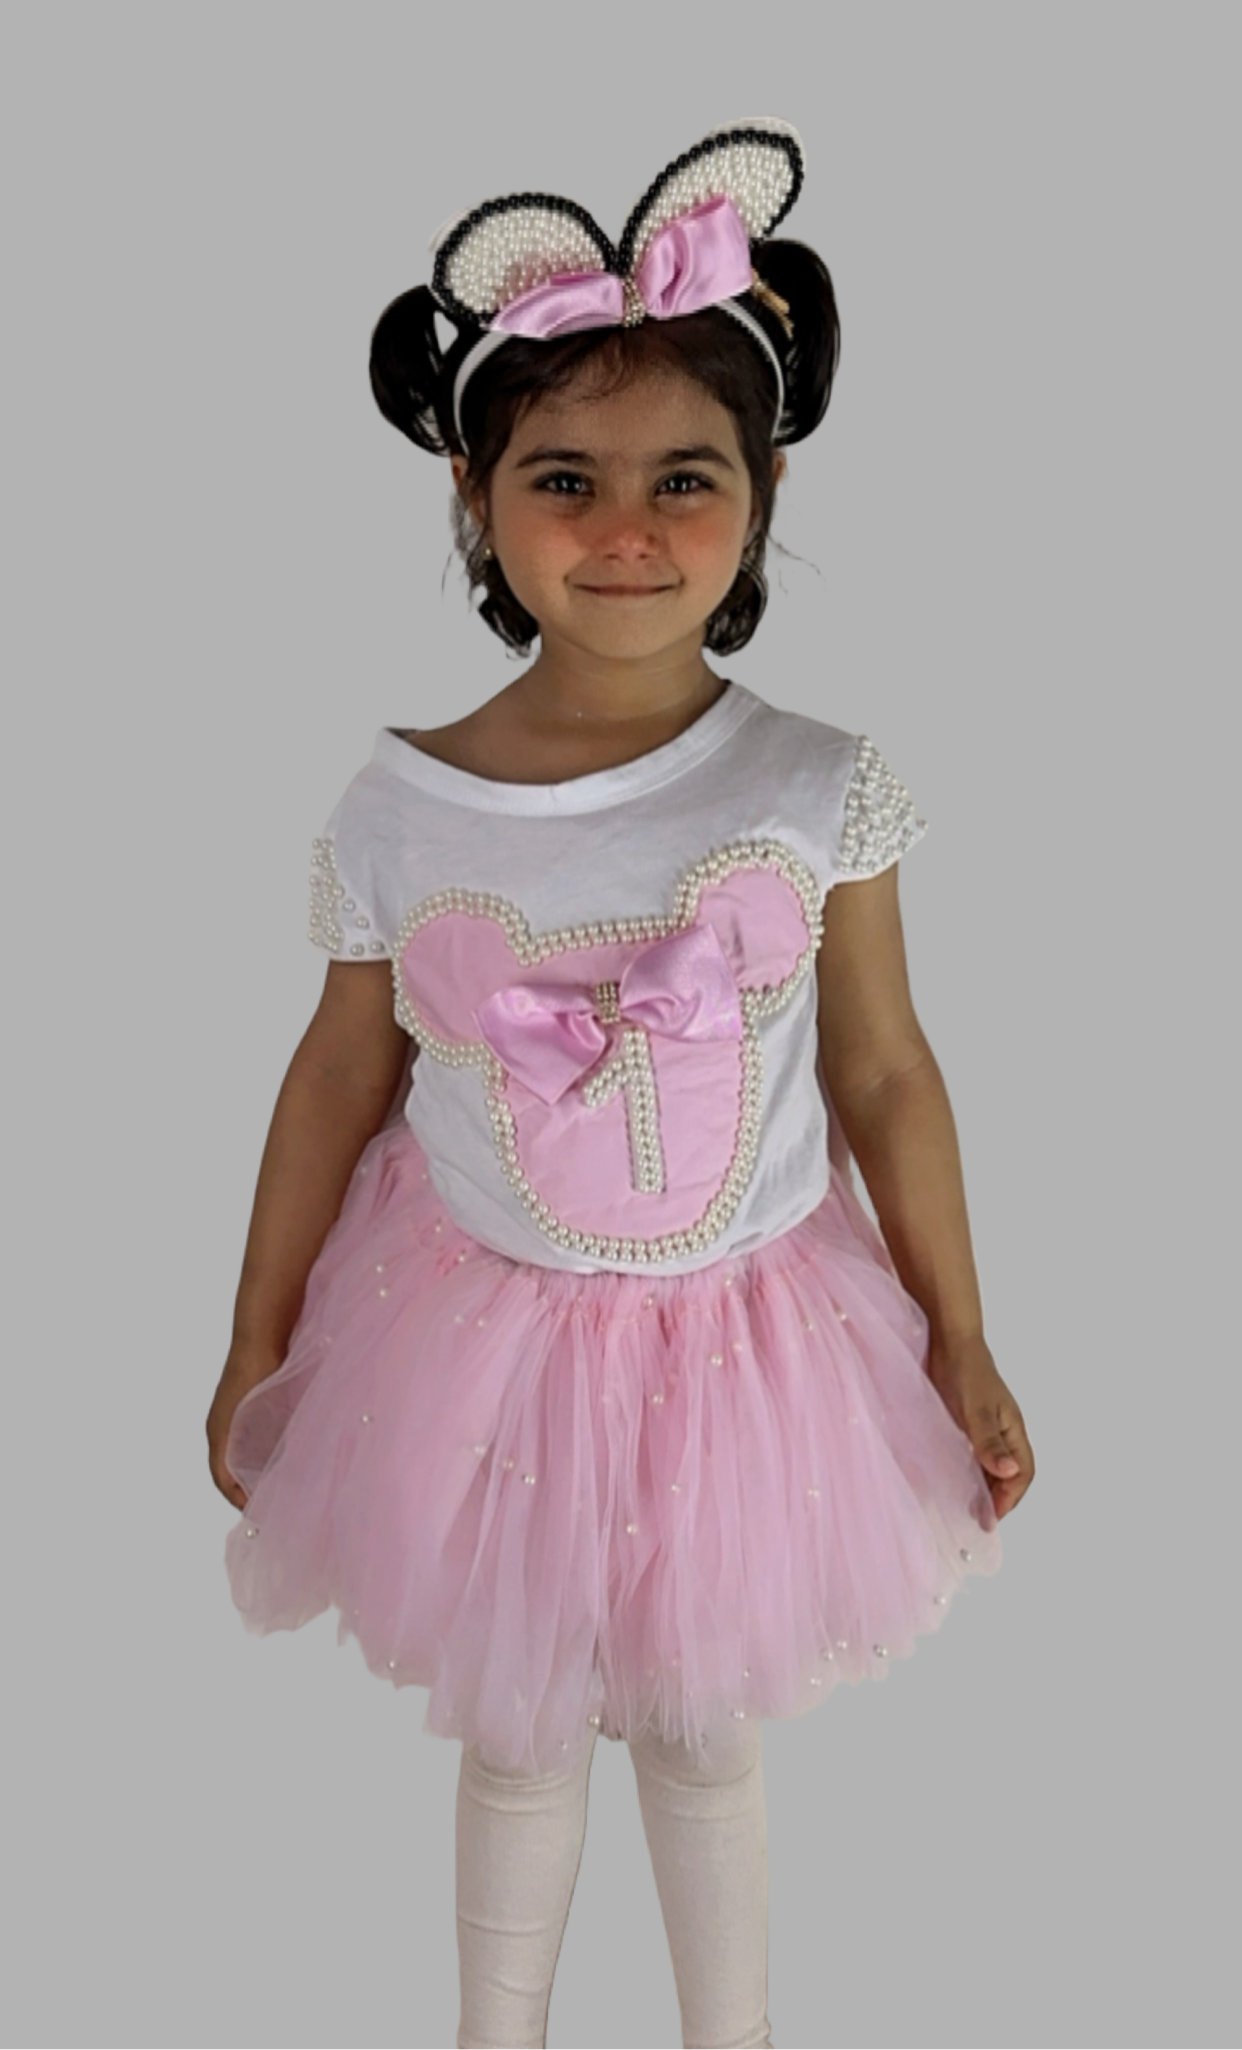 Children's party set with Minnie Mouse and pearl embroidery